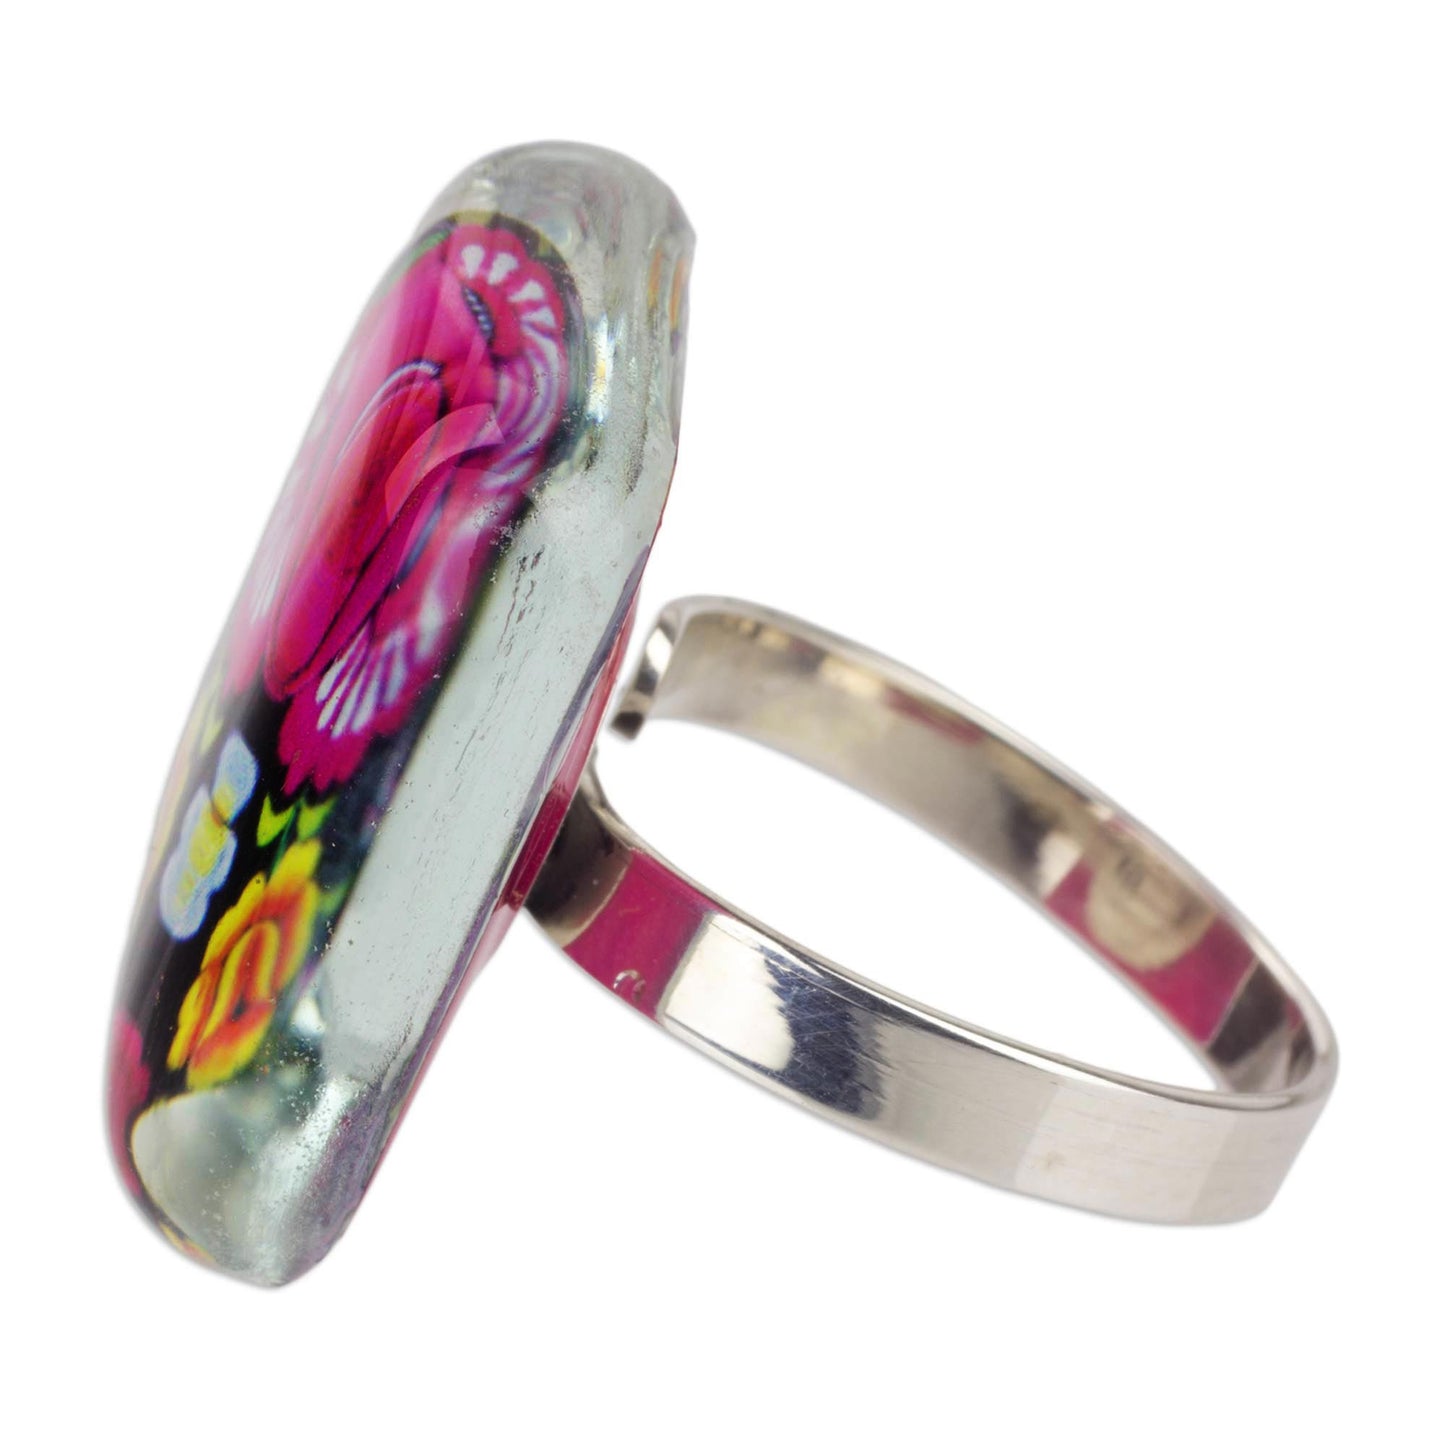 'Oaxaca Bouquet' Art Glass Artisan Crafted Cocktail Ring